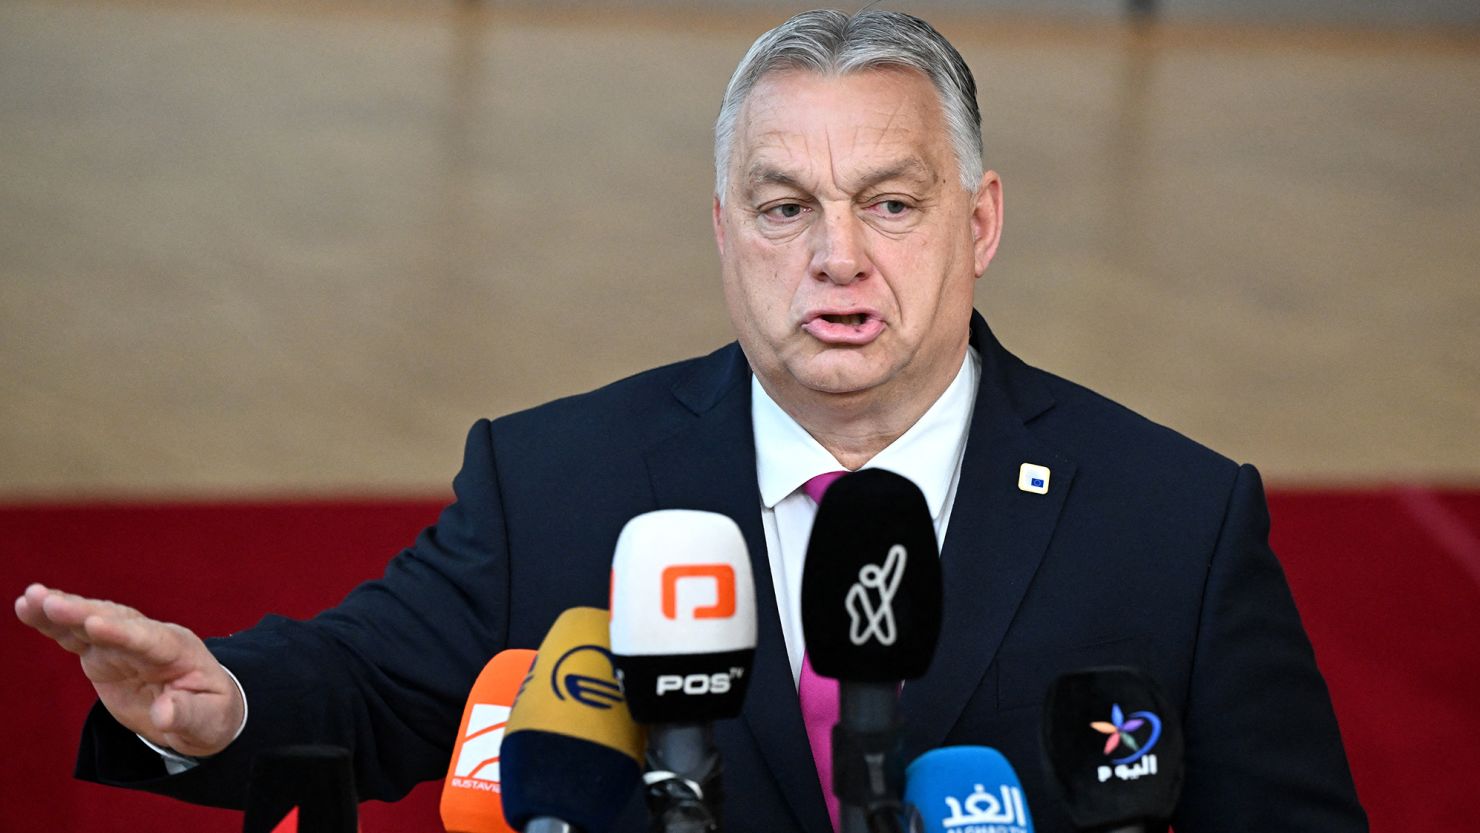 Hungary's Prime Minister Viktor Orban gestures as he talks to the media after arriving at the European headquarters for the EU-Western Balkans summit, in Brussels, on December 14, 2023. EU leaders agreed on December 14, 2023, to open talks with Ukraine on joining the bloc, after Hungarian Prime Minister Viktor Orban ducked out of his threat to veto the plan. The EU's 27 leaders were focused at a crunch summit in Brussels on granting Kyiv a four-year 50-billion-euro ($55-billion) funding package and an agreement to launch formal EU talks for Ukraine on joining the bloc. (Photo by JOHN THYS / AFP) (Photo by JOHN THYS/AFP via Getty Images)